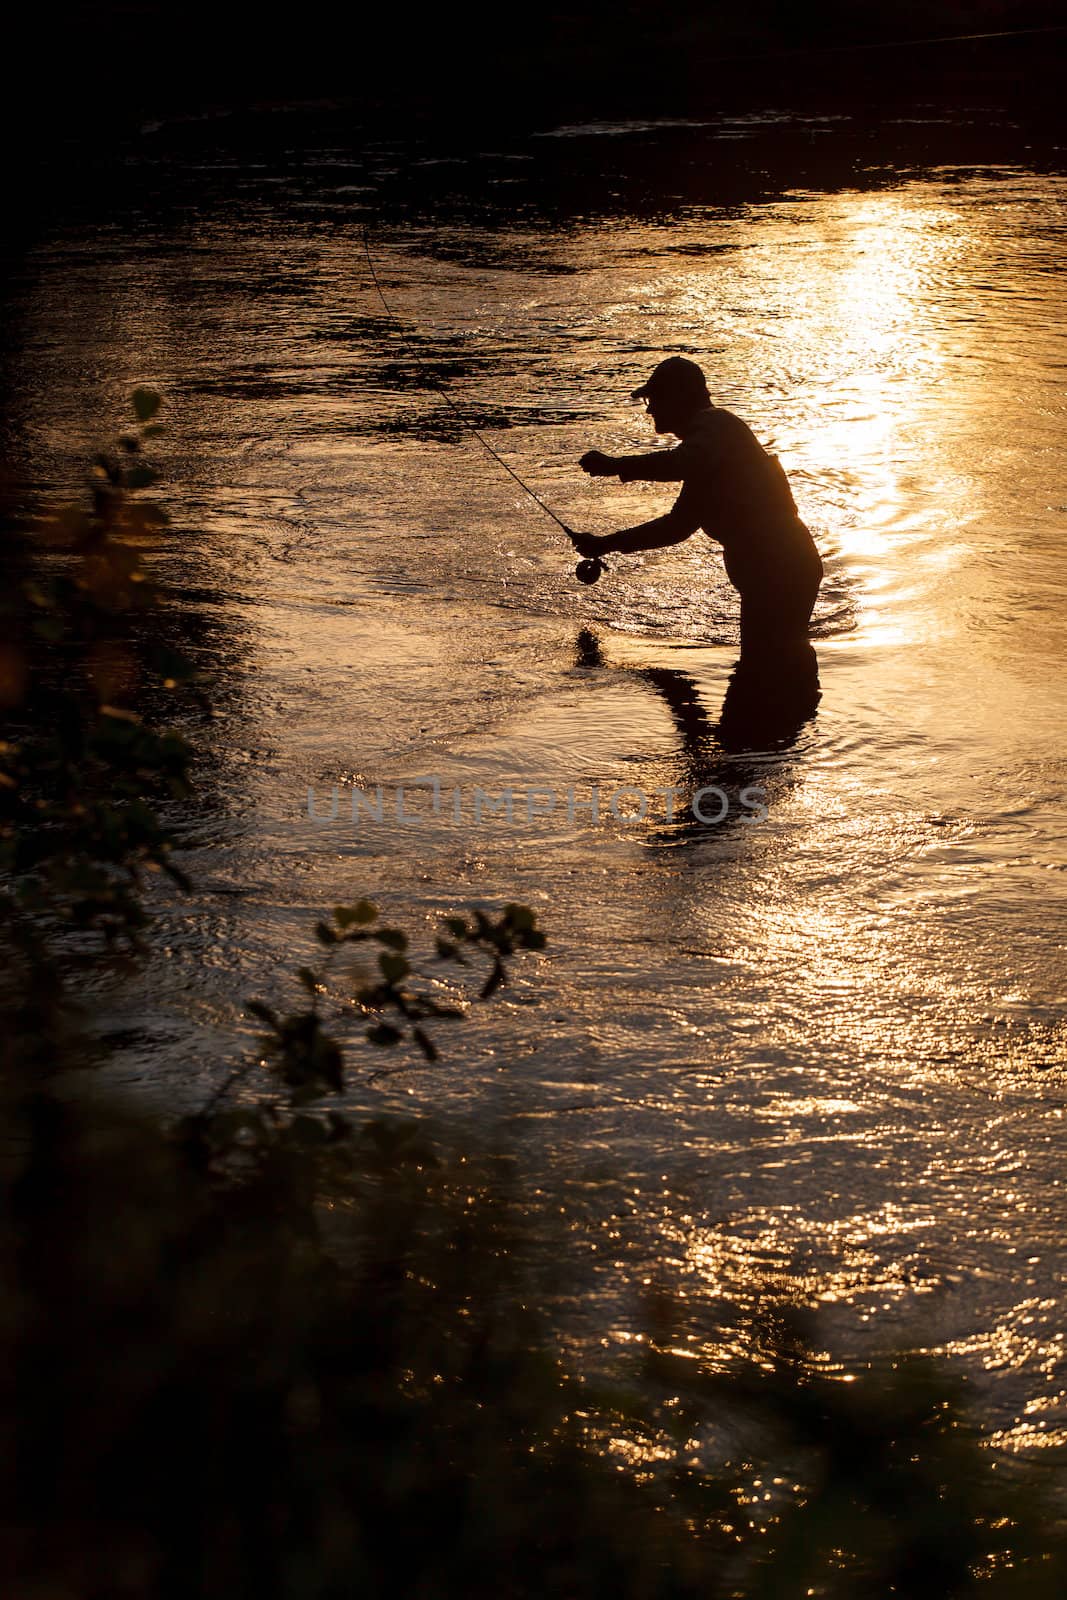 fisherman on the rive